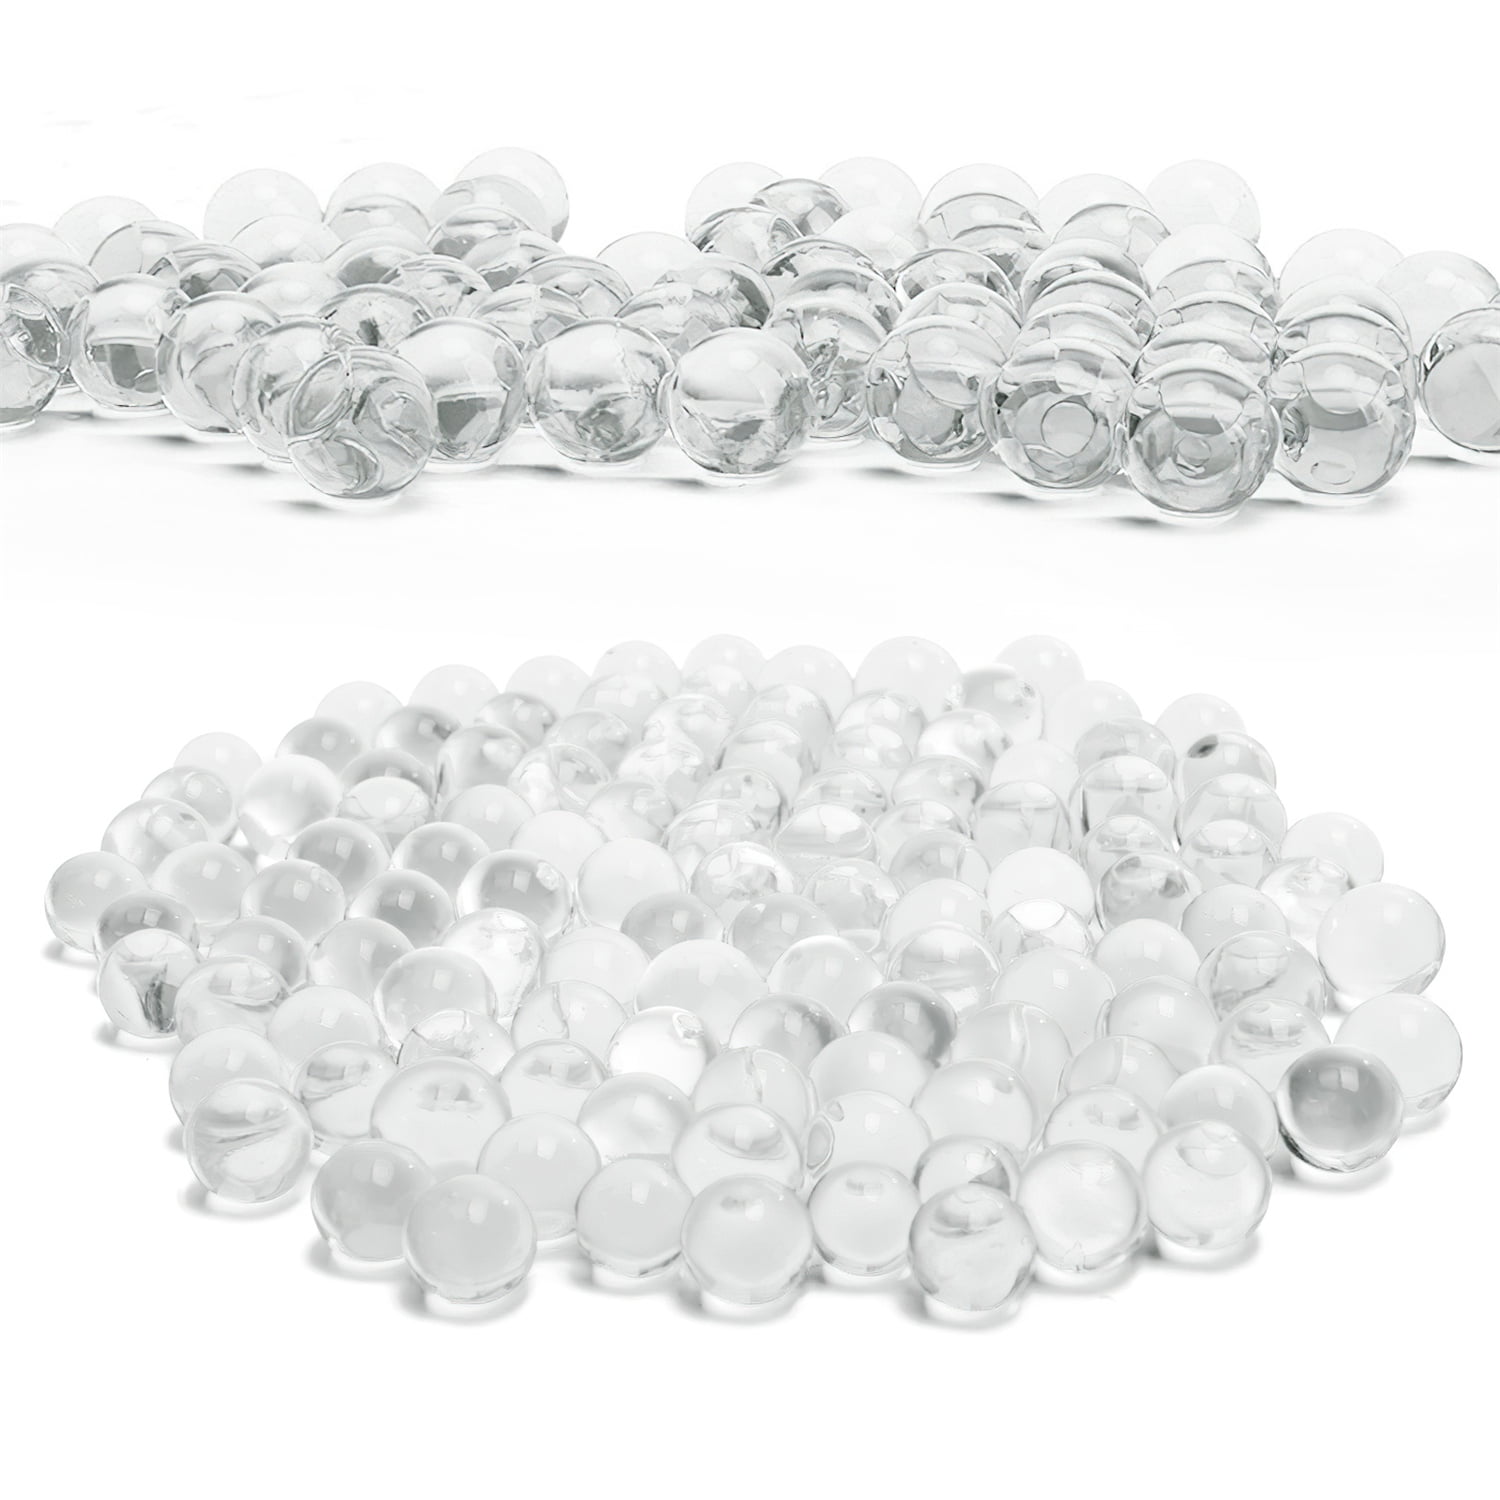  YIQUDUO 100,000 Clear Water Beads for Vases, Transparent Water  Gel Beads Vase Filler for Floating Pearls, Floating Candle Making, Wedding  Decoration Floral Arrangement : Home & Kitchen